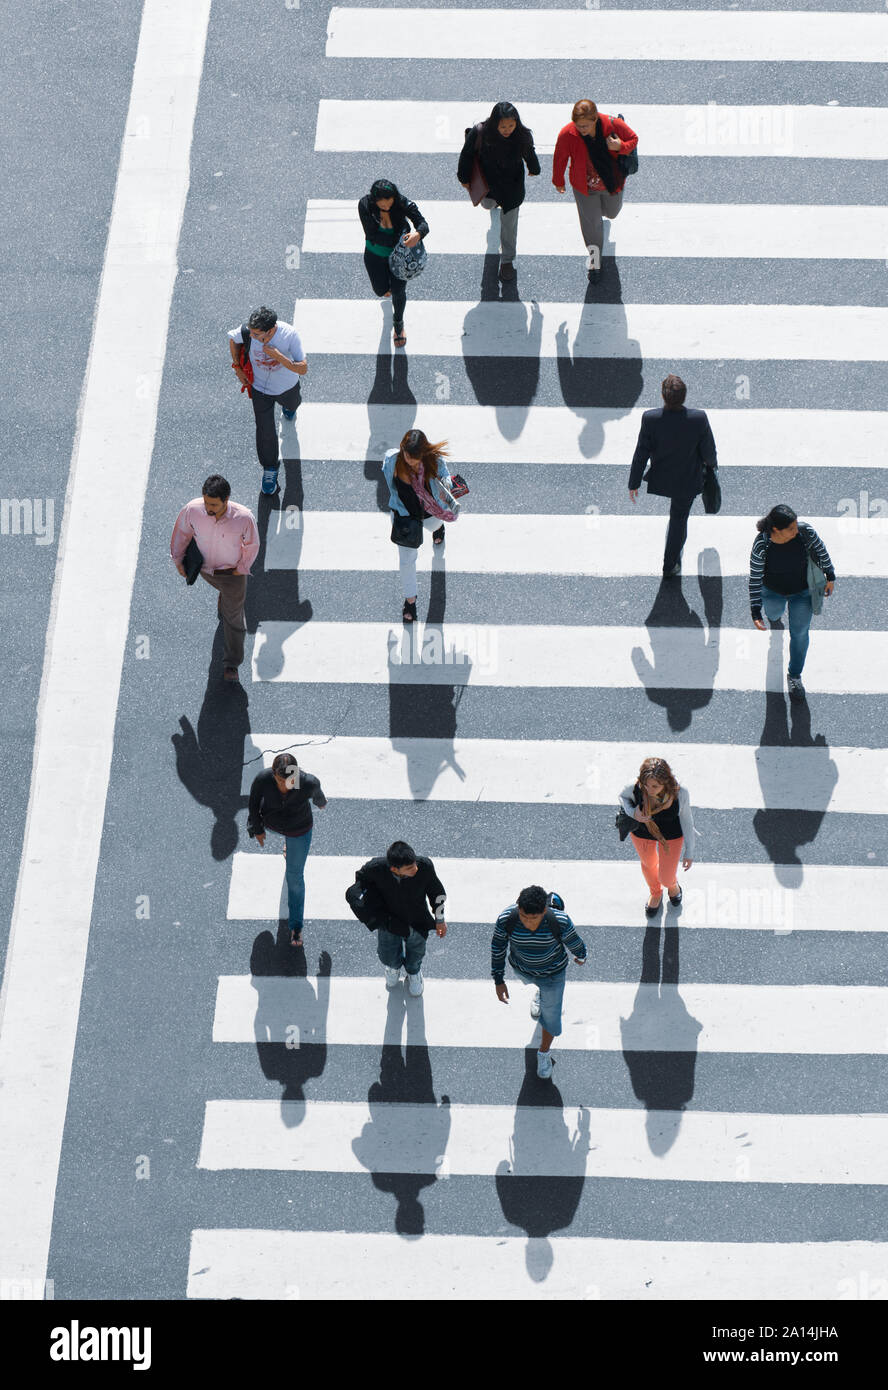 Buenos Aires, Argentina - November 13 2012: Pedestrians crossing the street over the zebra. Stock Photo